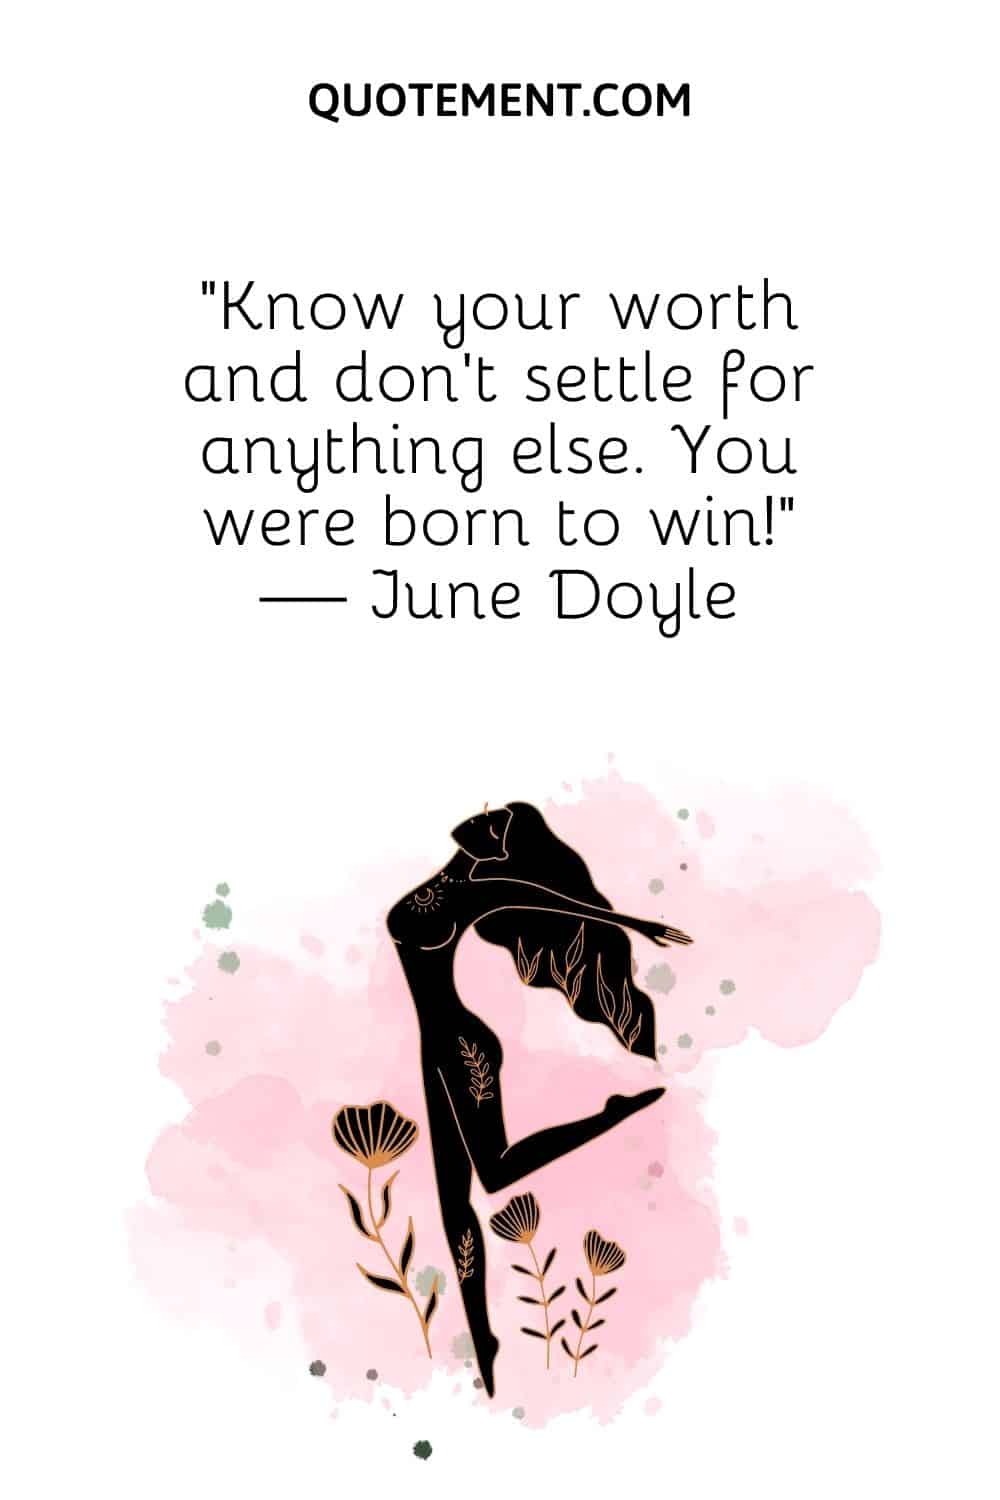 dancing woman image representing top know your worth quote